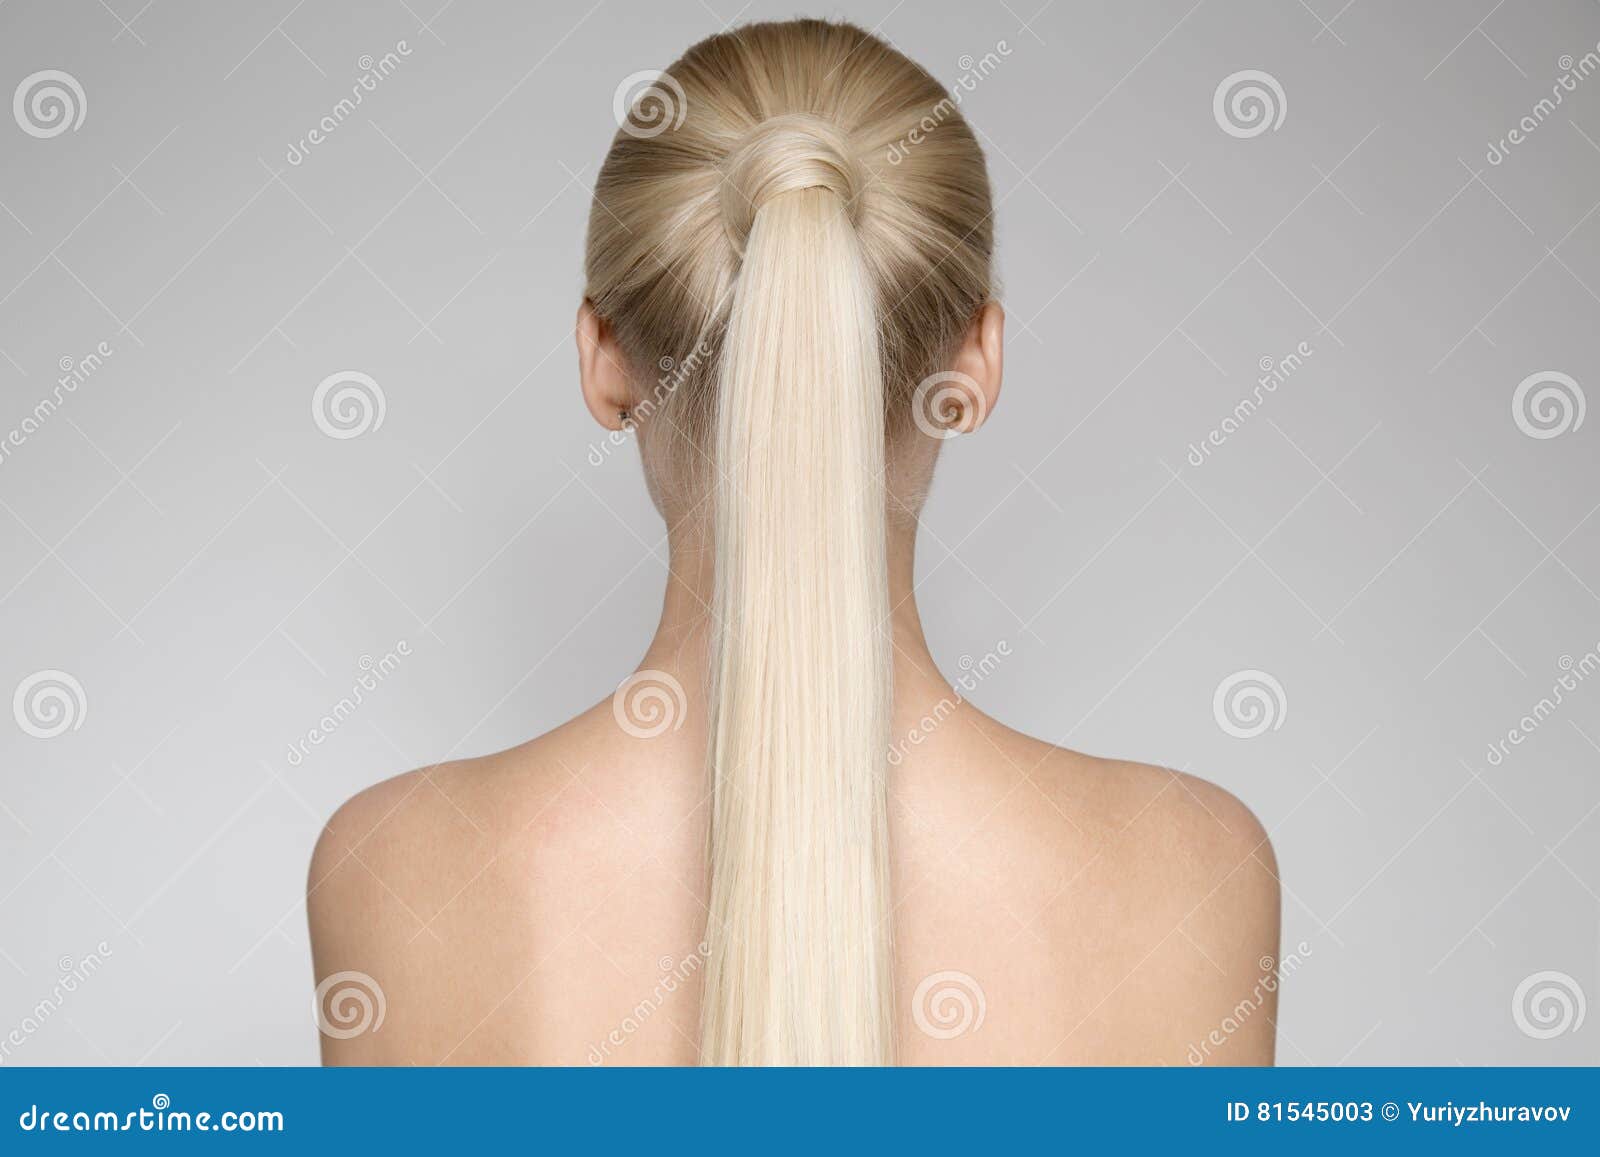 Blonde Woman with Ponytail - wide 4